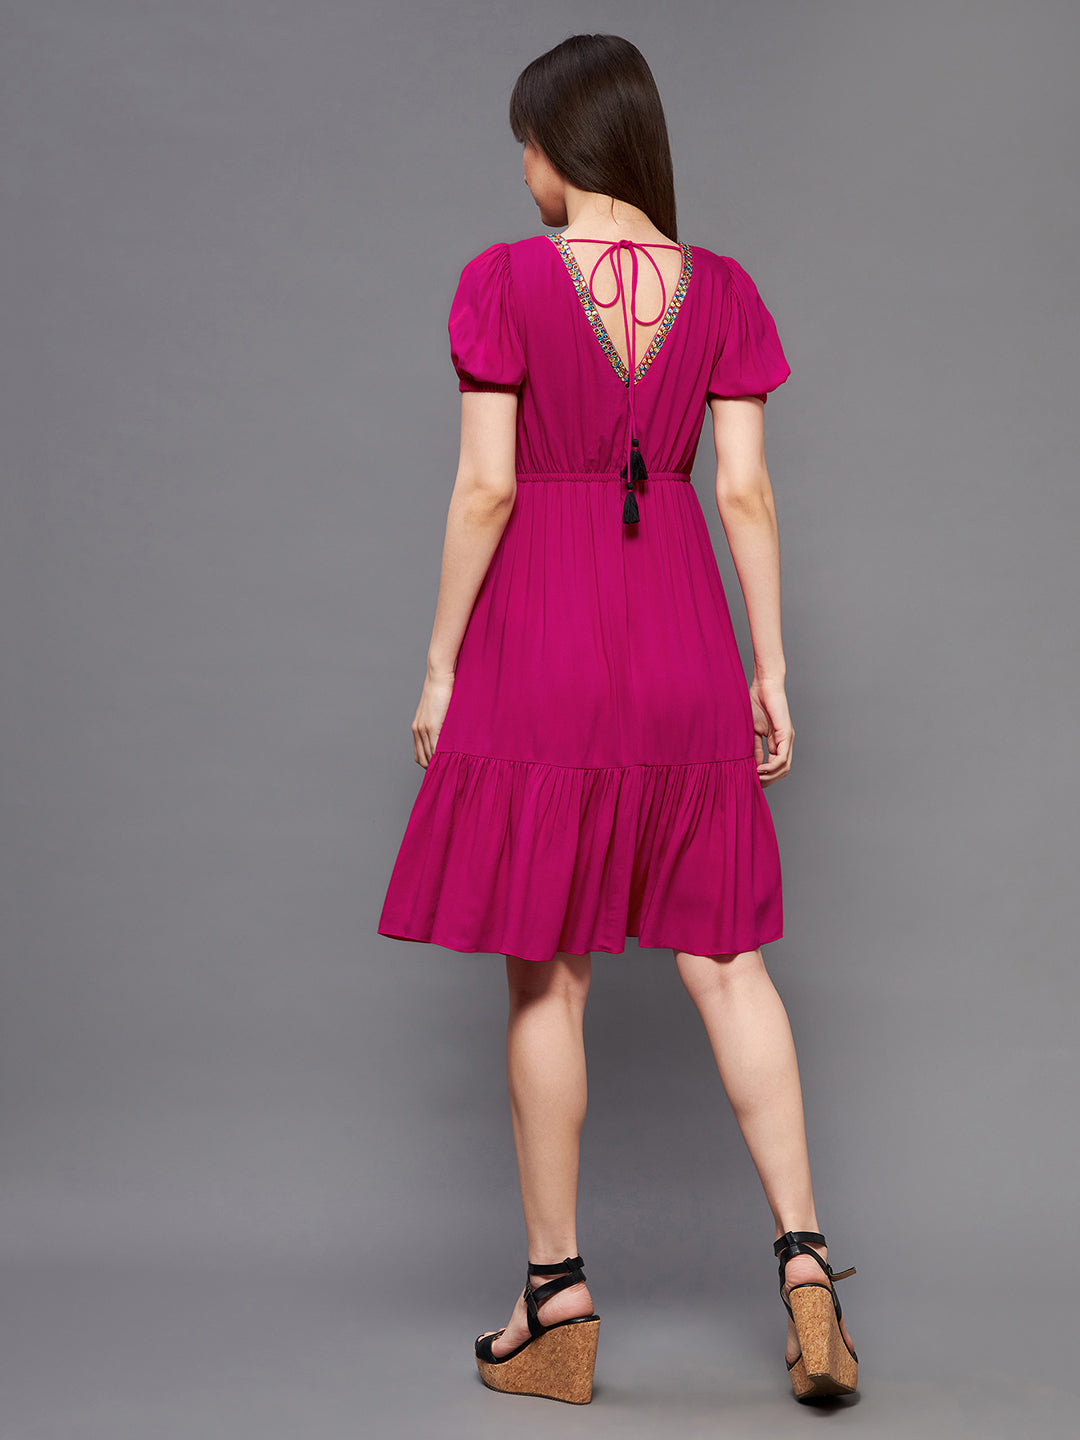 Women's Dark Pink Square  Puff Sleeve Viscose Rayon Embroidered Lace Overlaid Knee-Long Dress